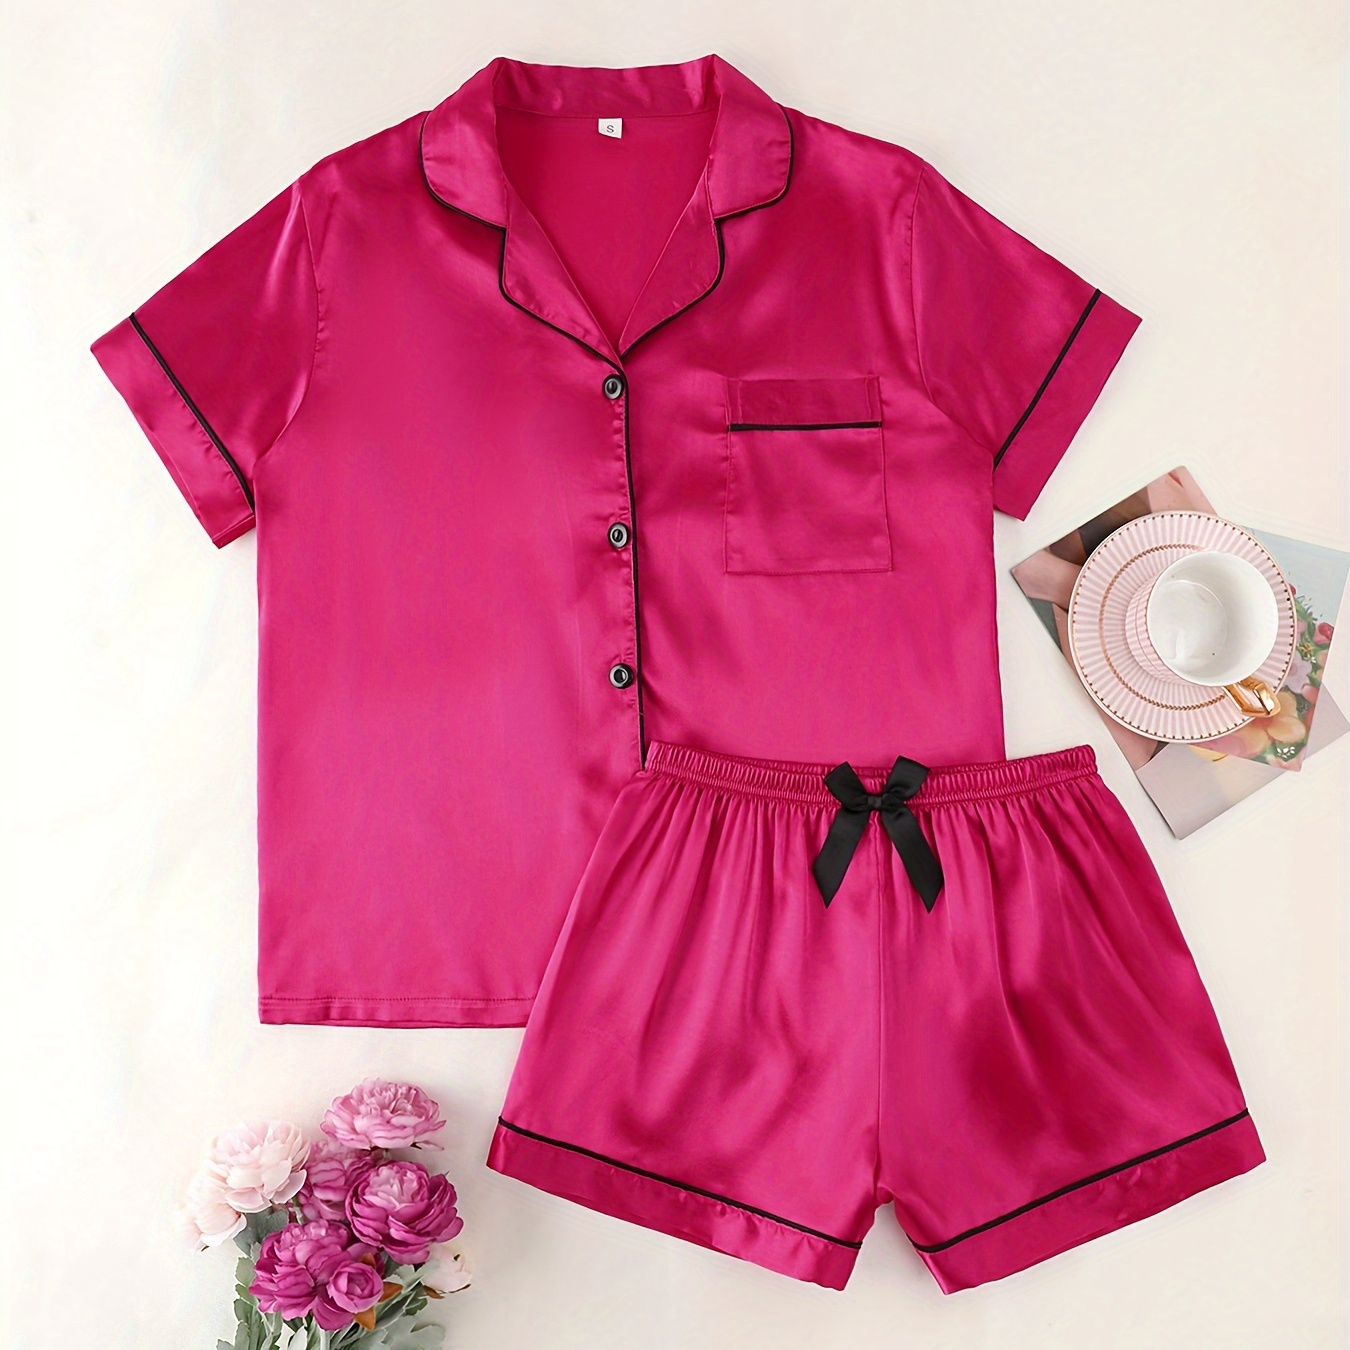 

Women's Solid Satin Casual Pajama Set, Short Sleeve Buttons Lapel Top & Bow Decor Shorts, Comfortable Relaxed Fit